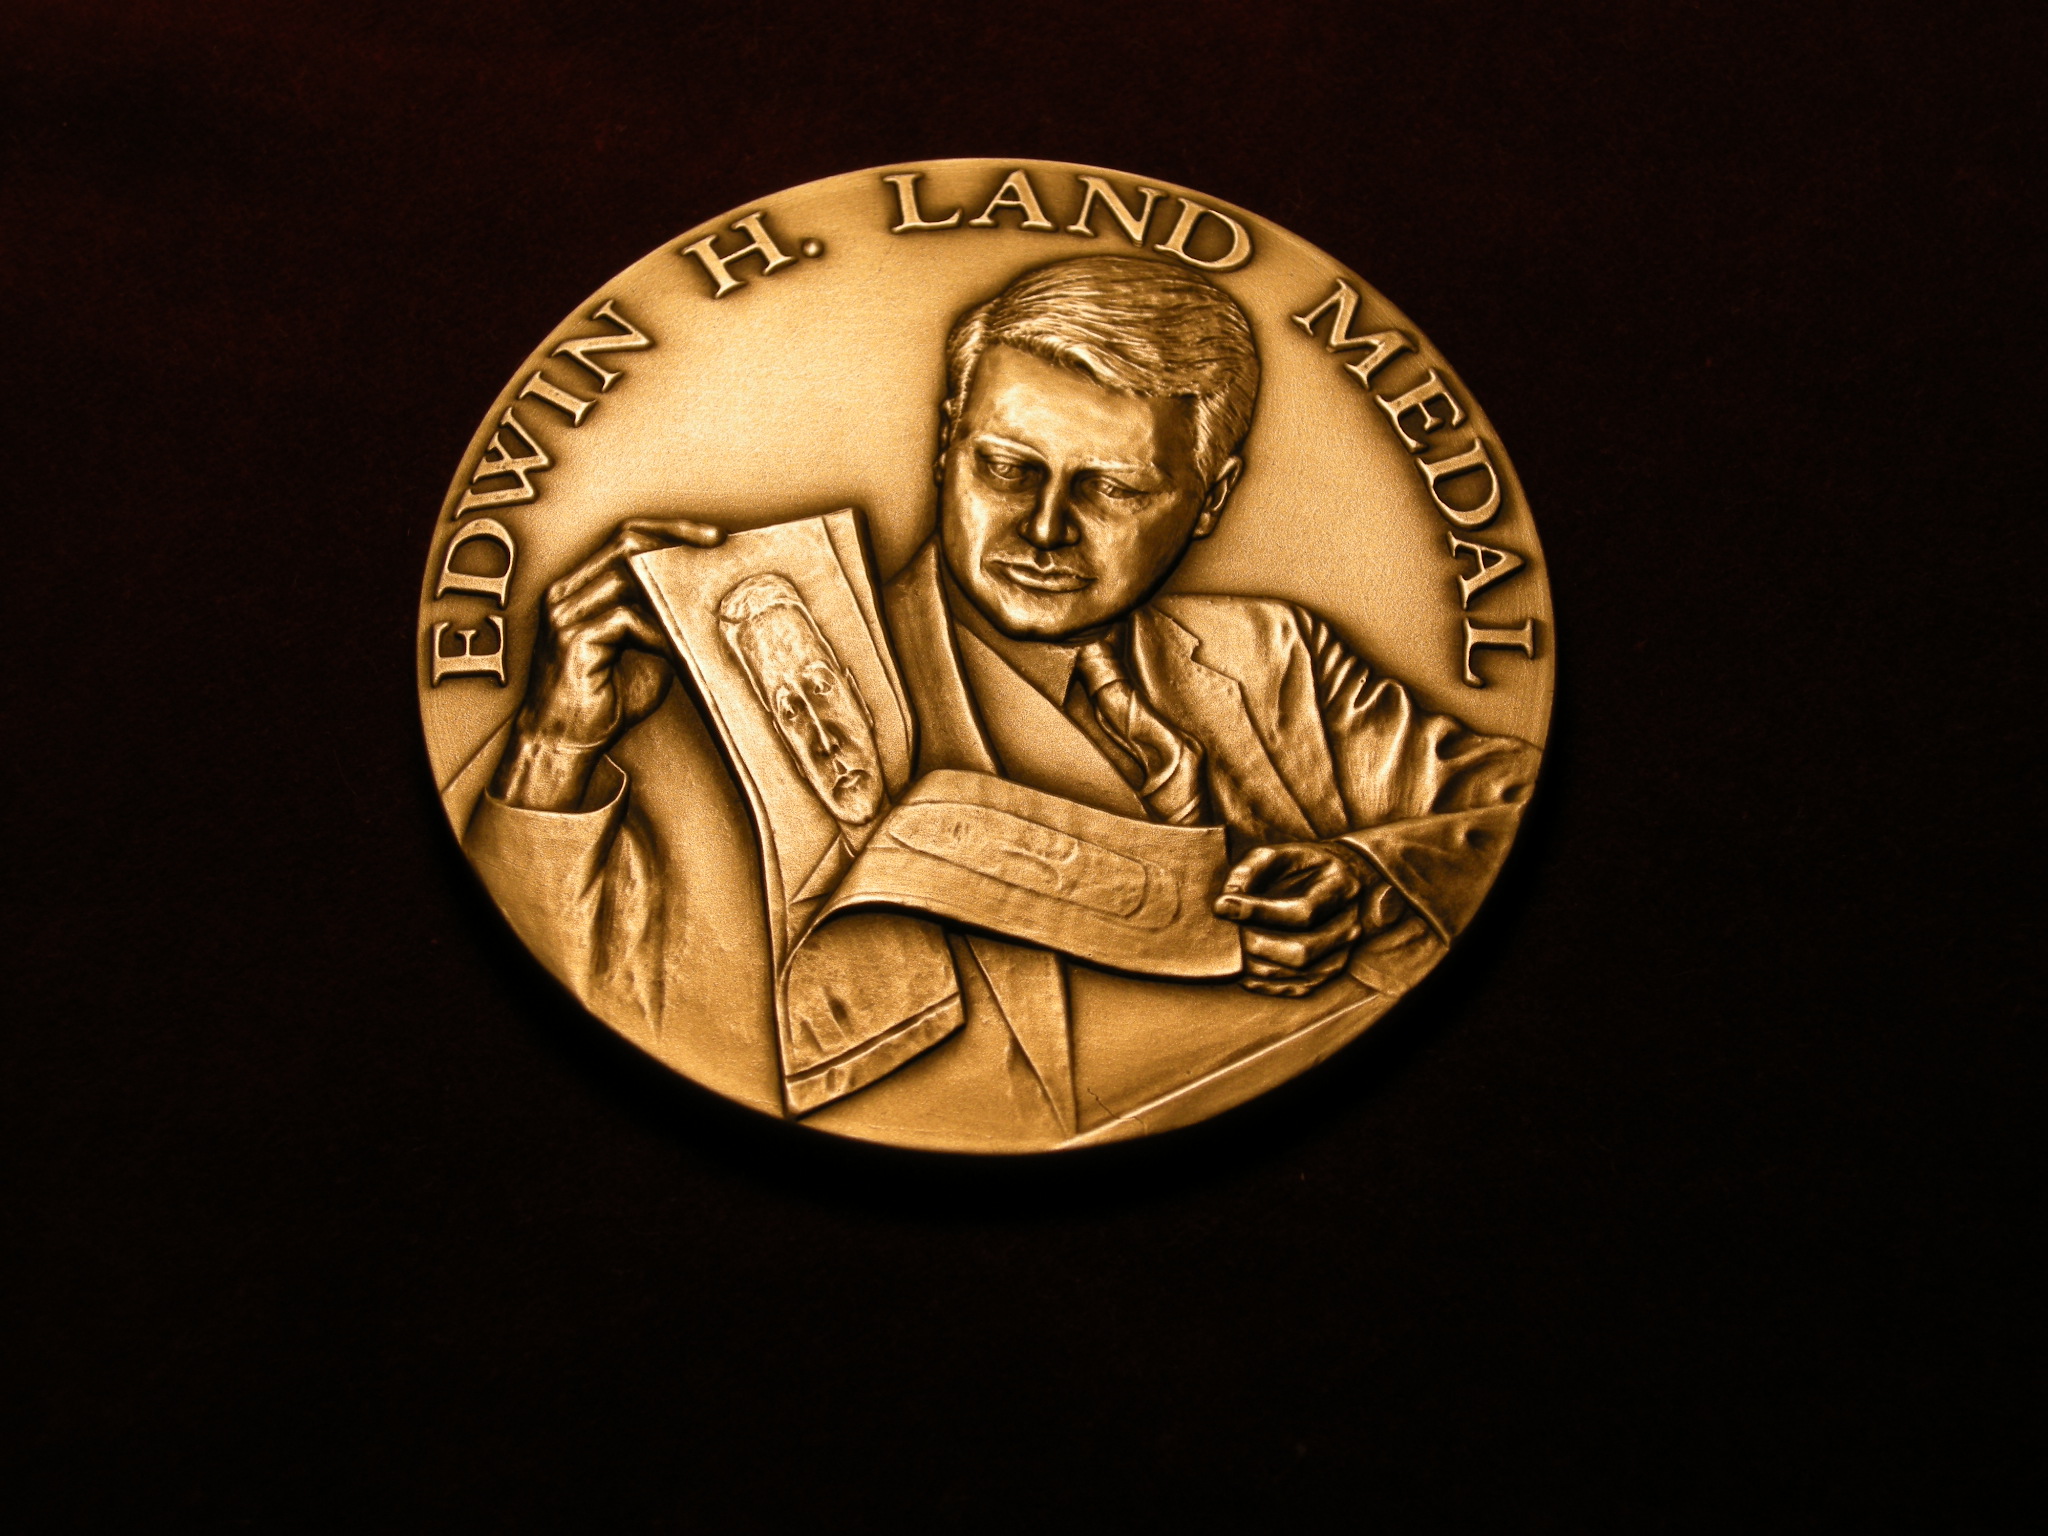 The Edwin H. Land Medal